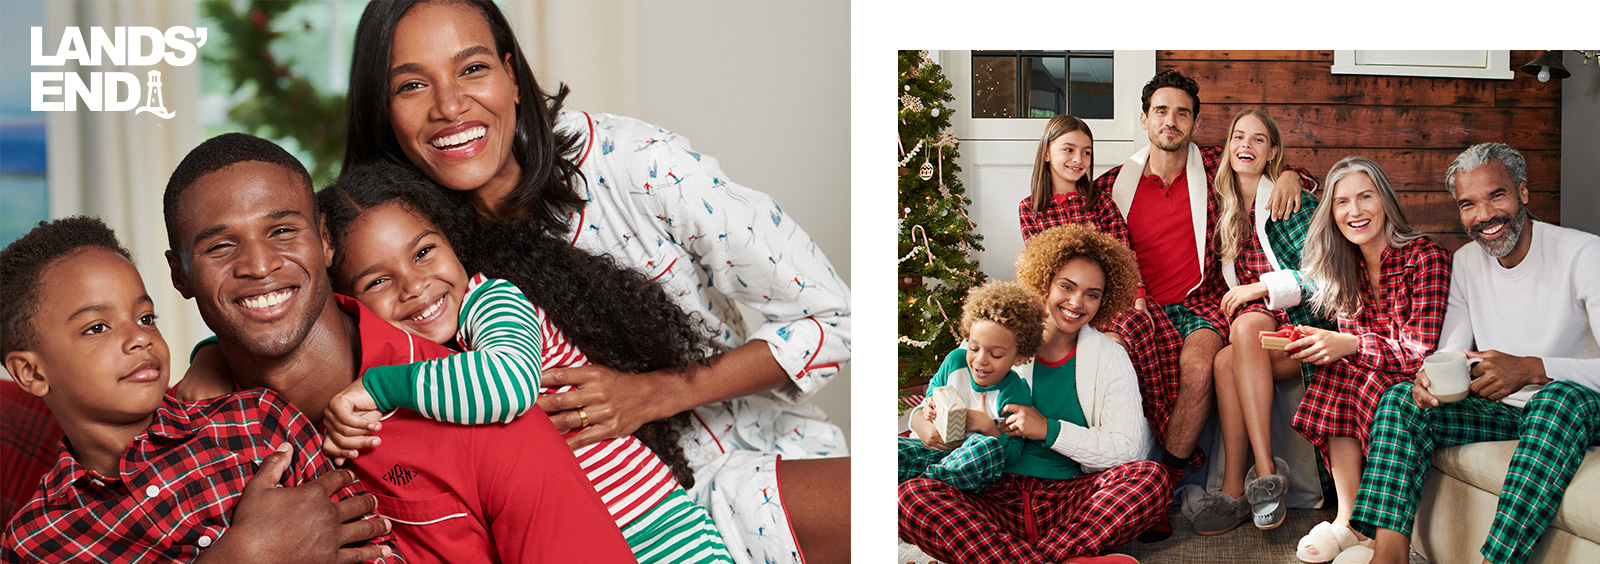 4 Adorable Matching PJ Ideas for The Whole Family